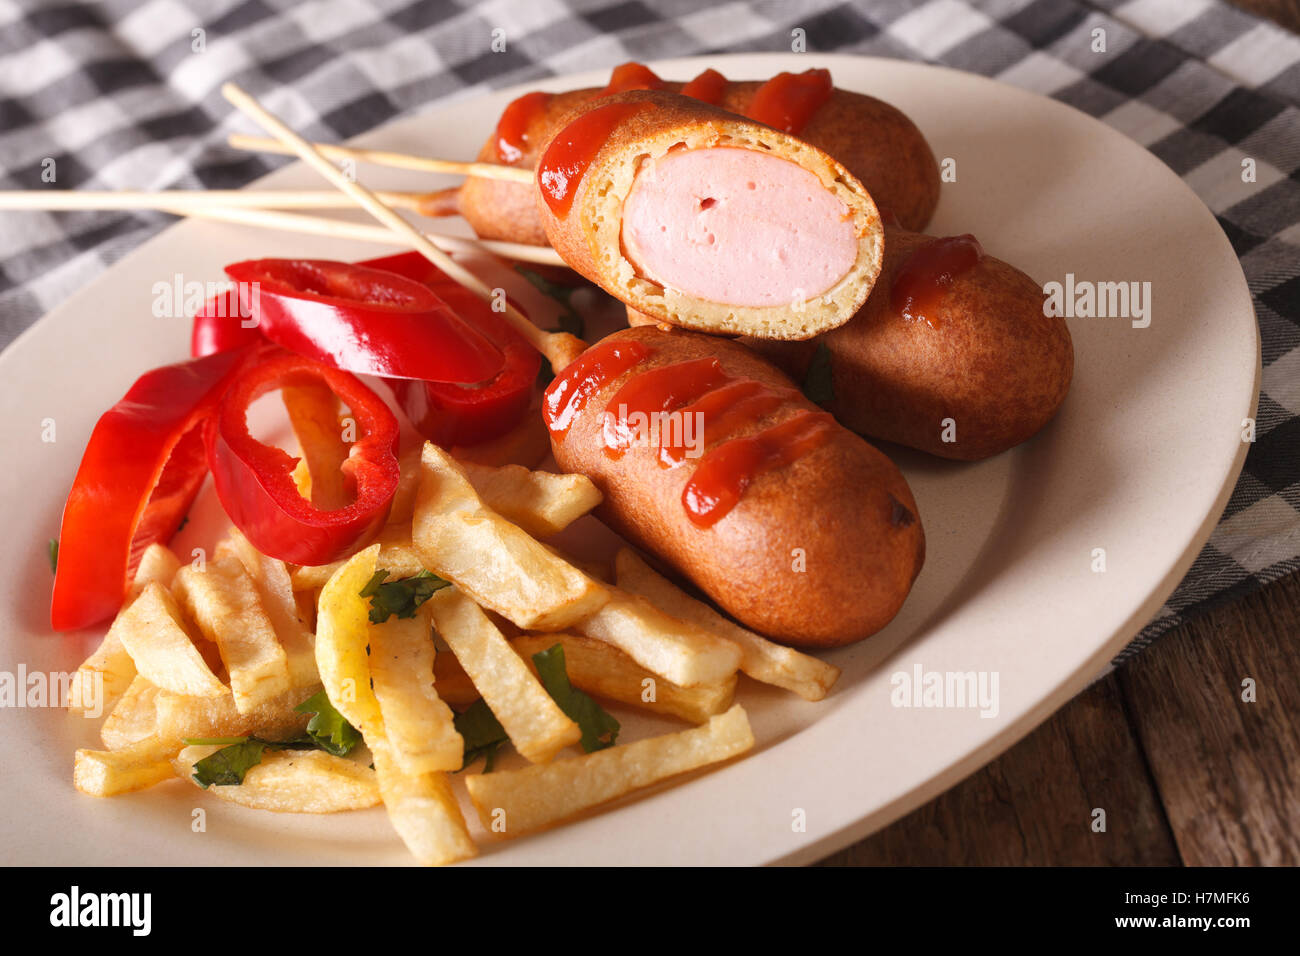 Corn dog, french fries and vegetables on a plate close-up on the table. horizontal Stock Photo